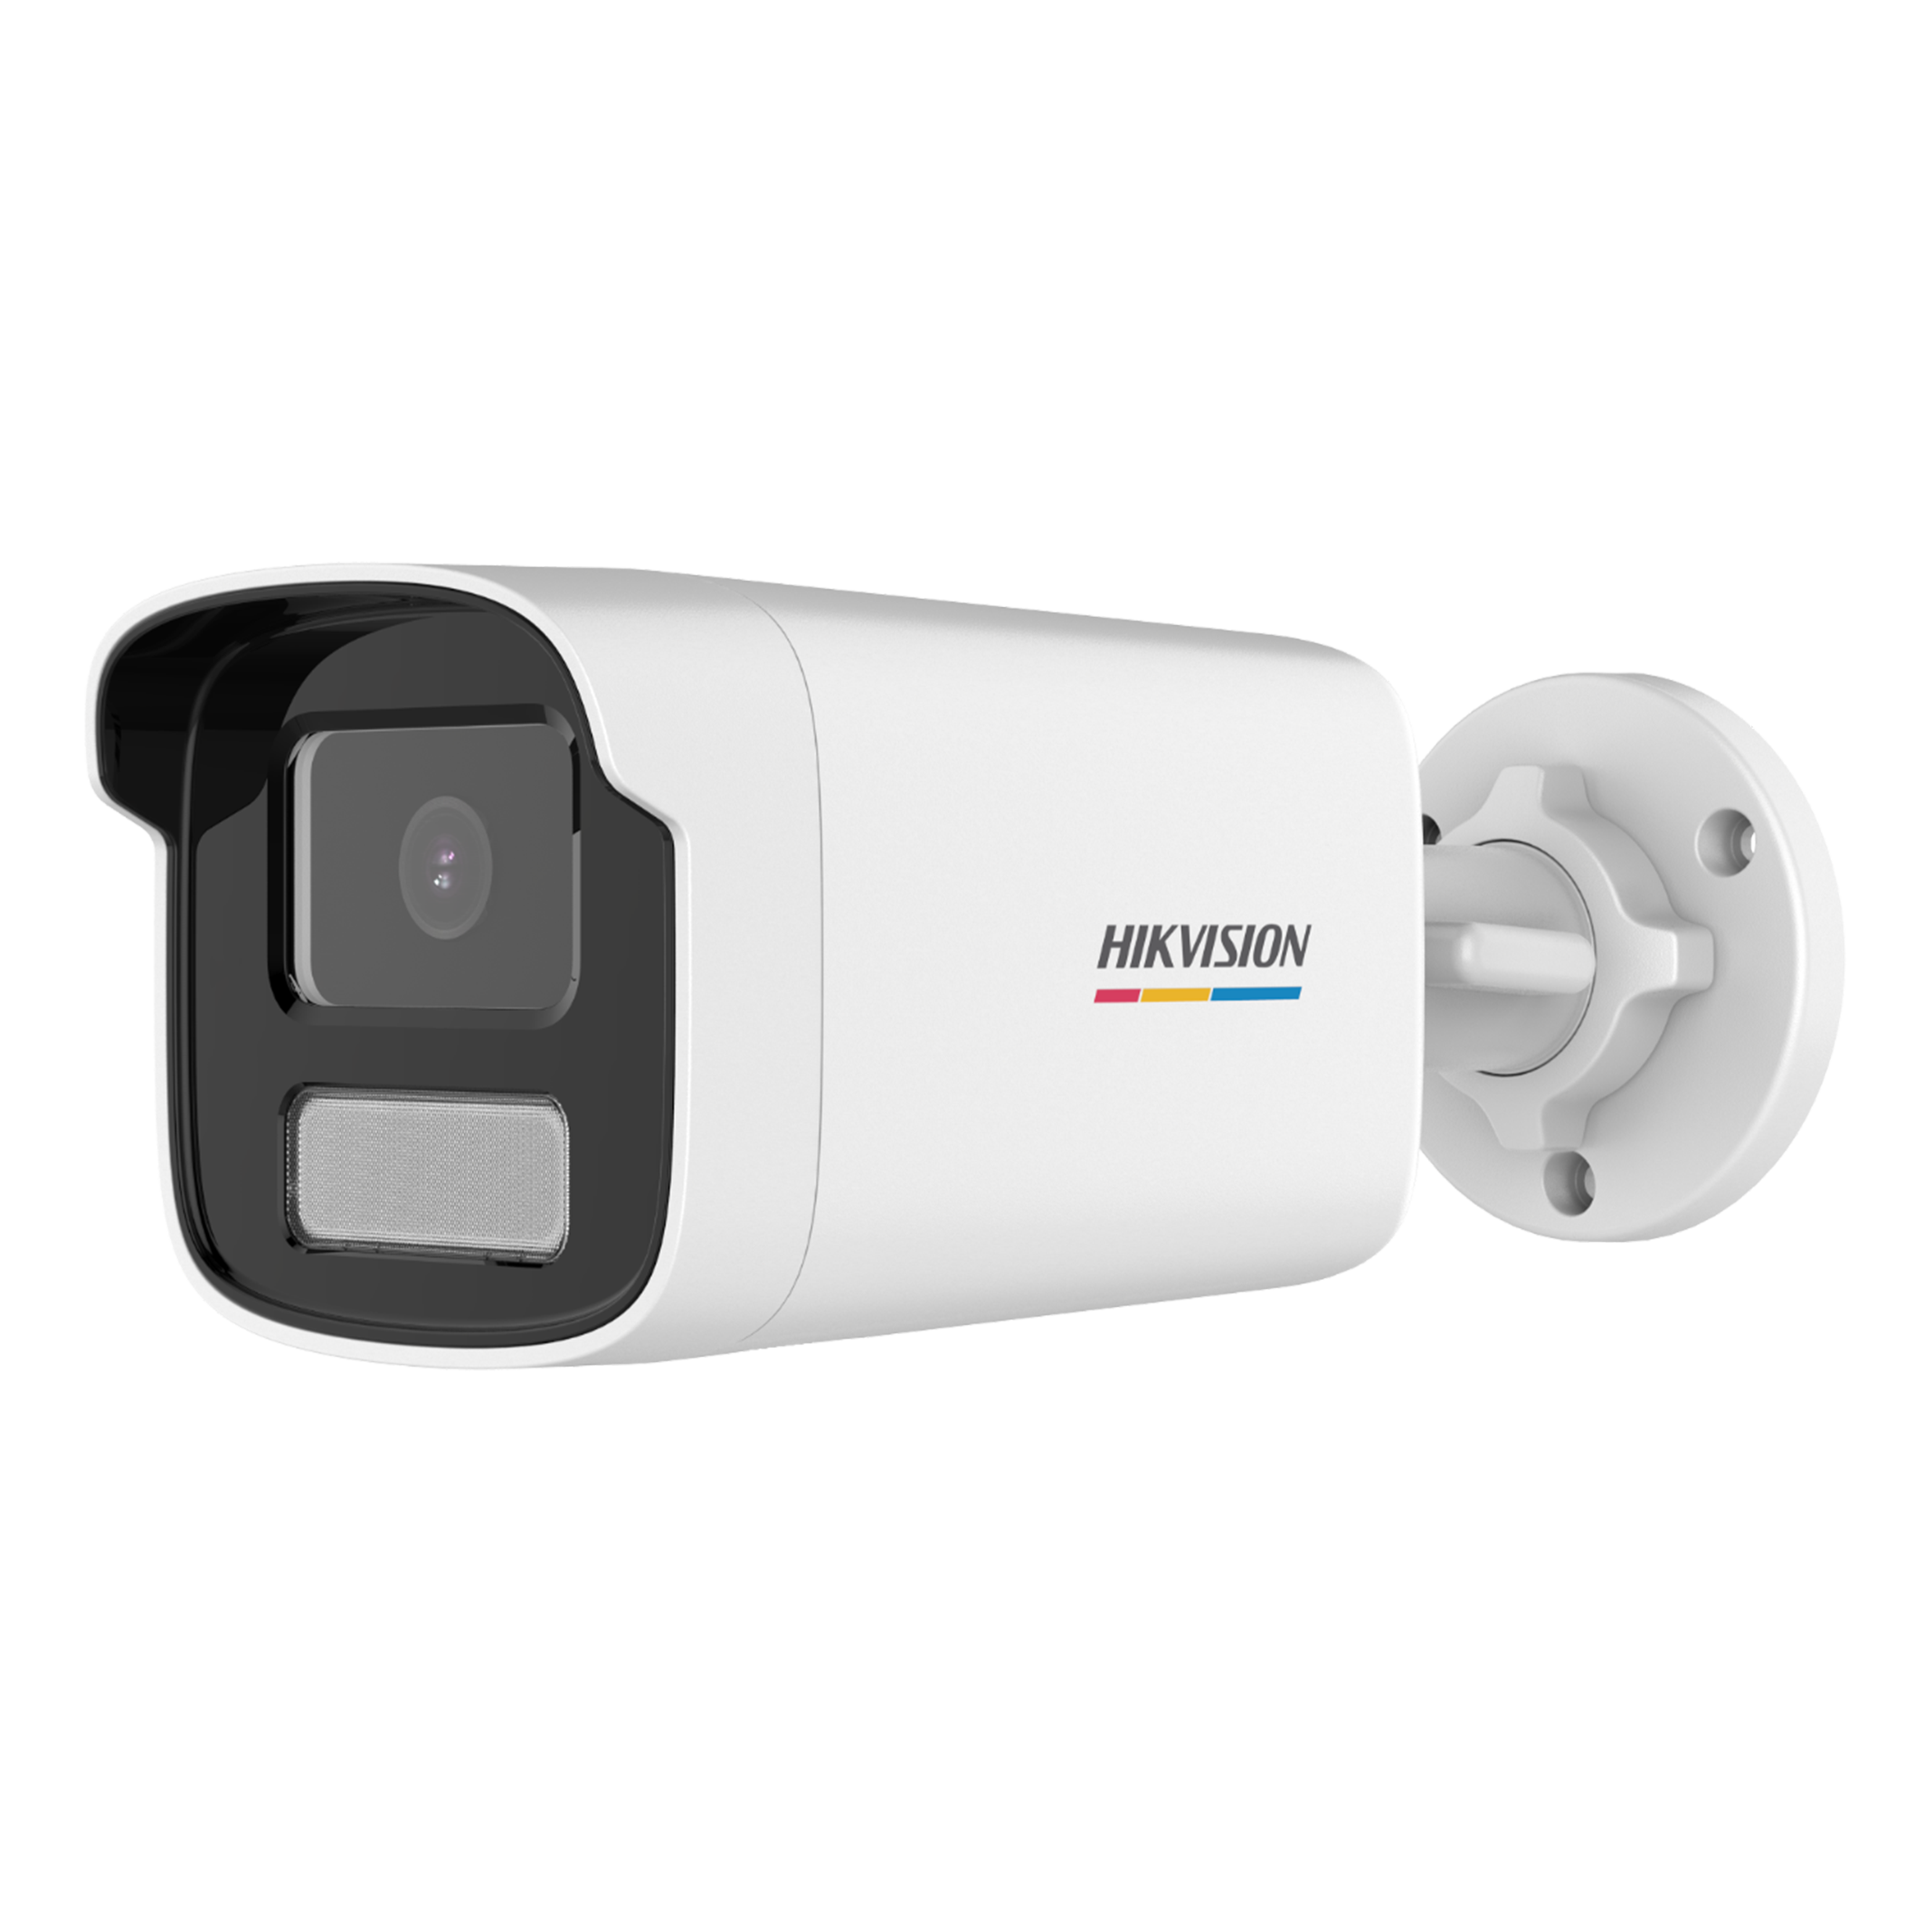 HIKVISION​ DS-2CD1T57G0-LUF​ Turbo HD Camera